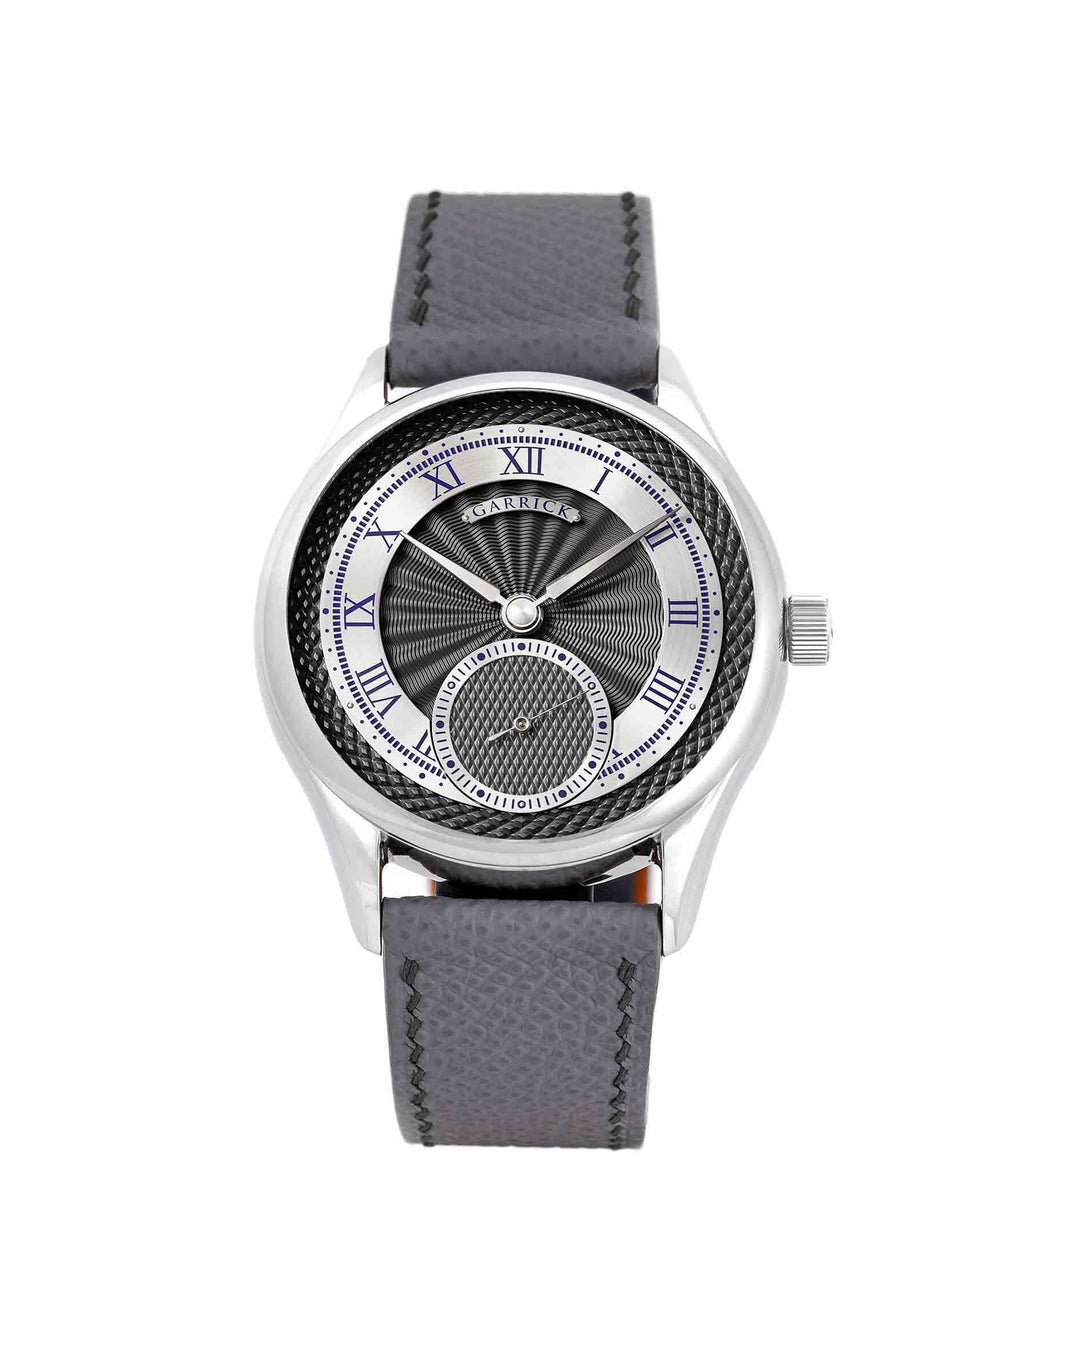 English made S7 watch with rhodium guilloche dial by Garrick Watchmakers